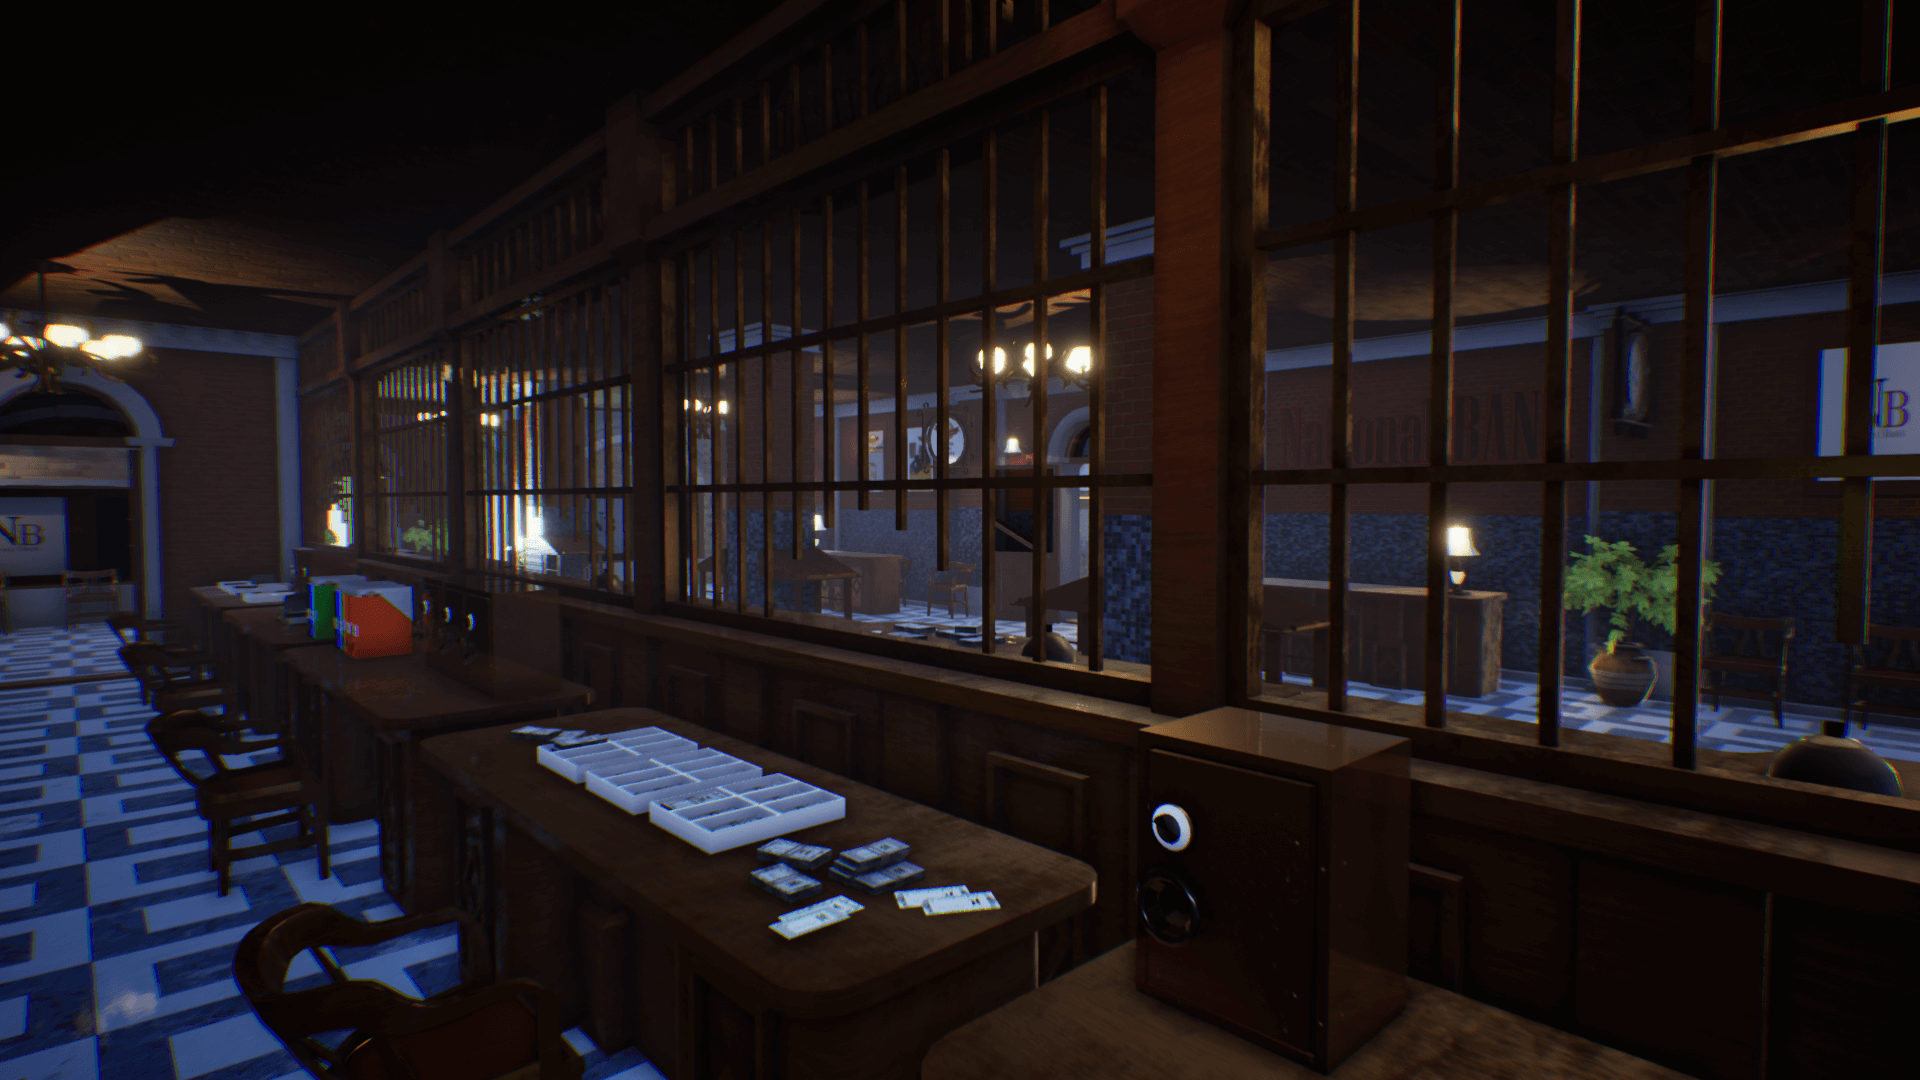 An image showing National Bank asset pack, created with Unreal Engine.